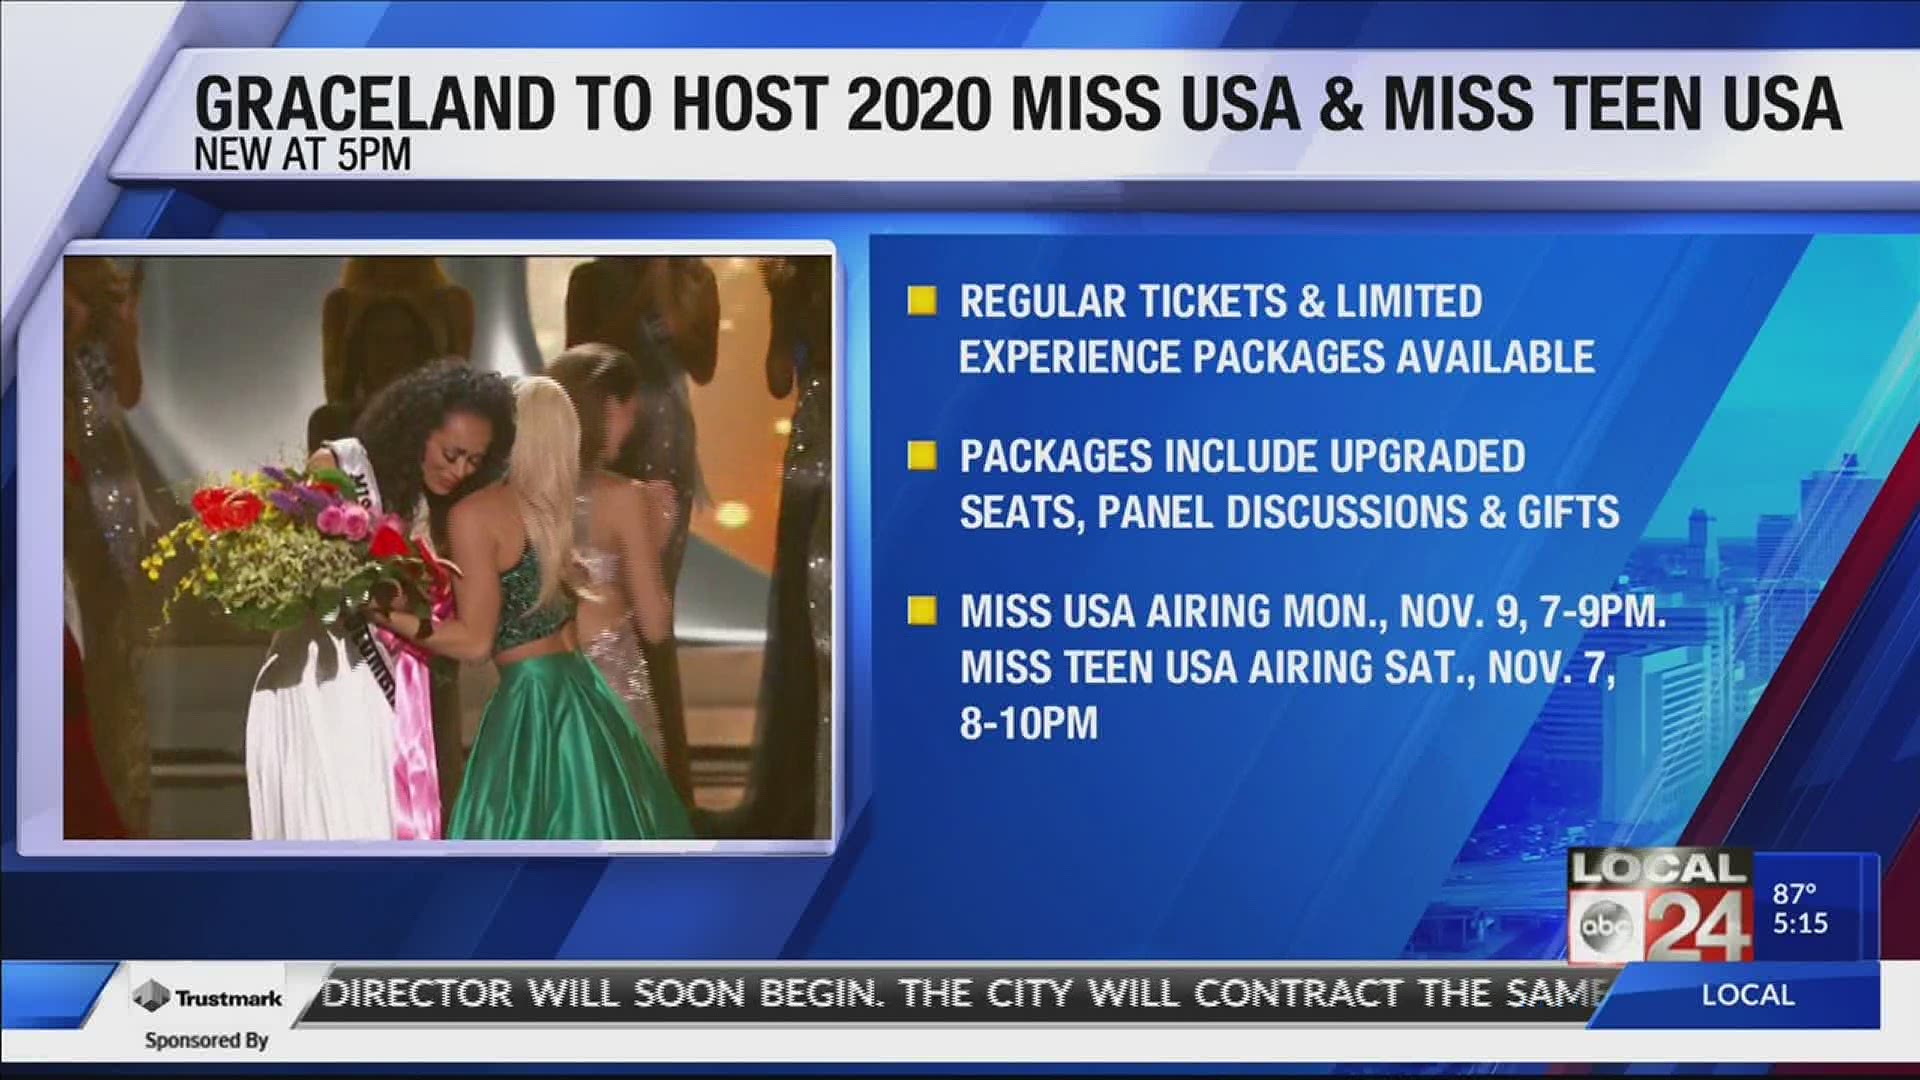 Miss USA is set for Monday, November 9th, and Miss Teen USA for Saturday, November 7th.